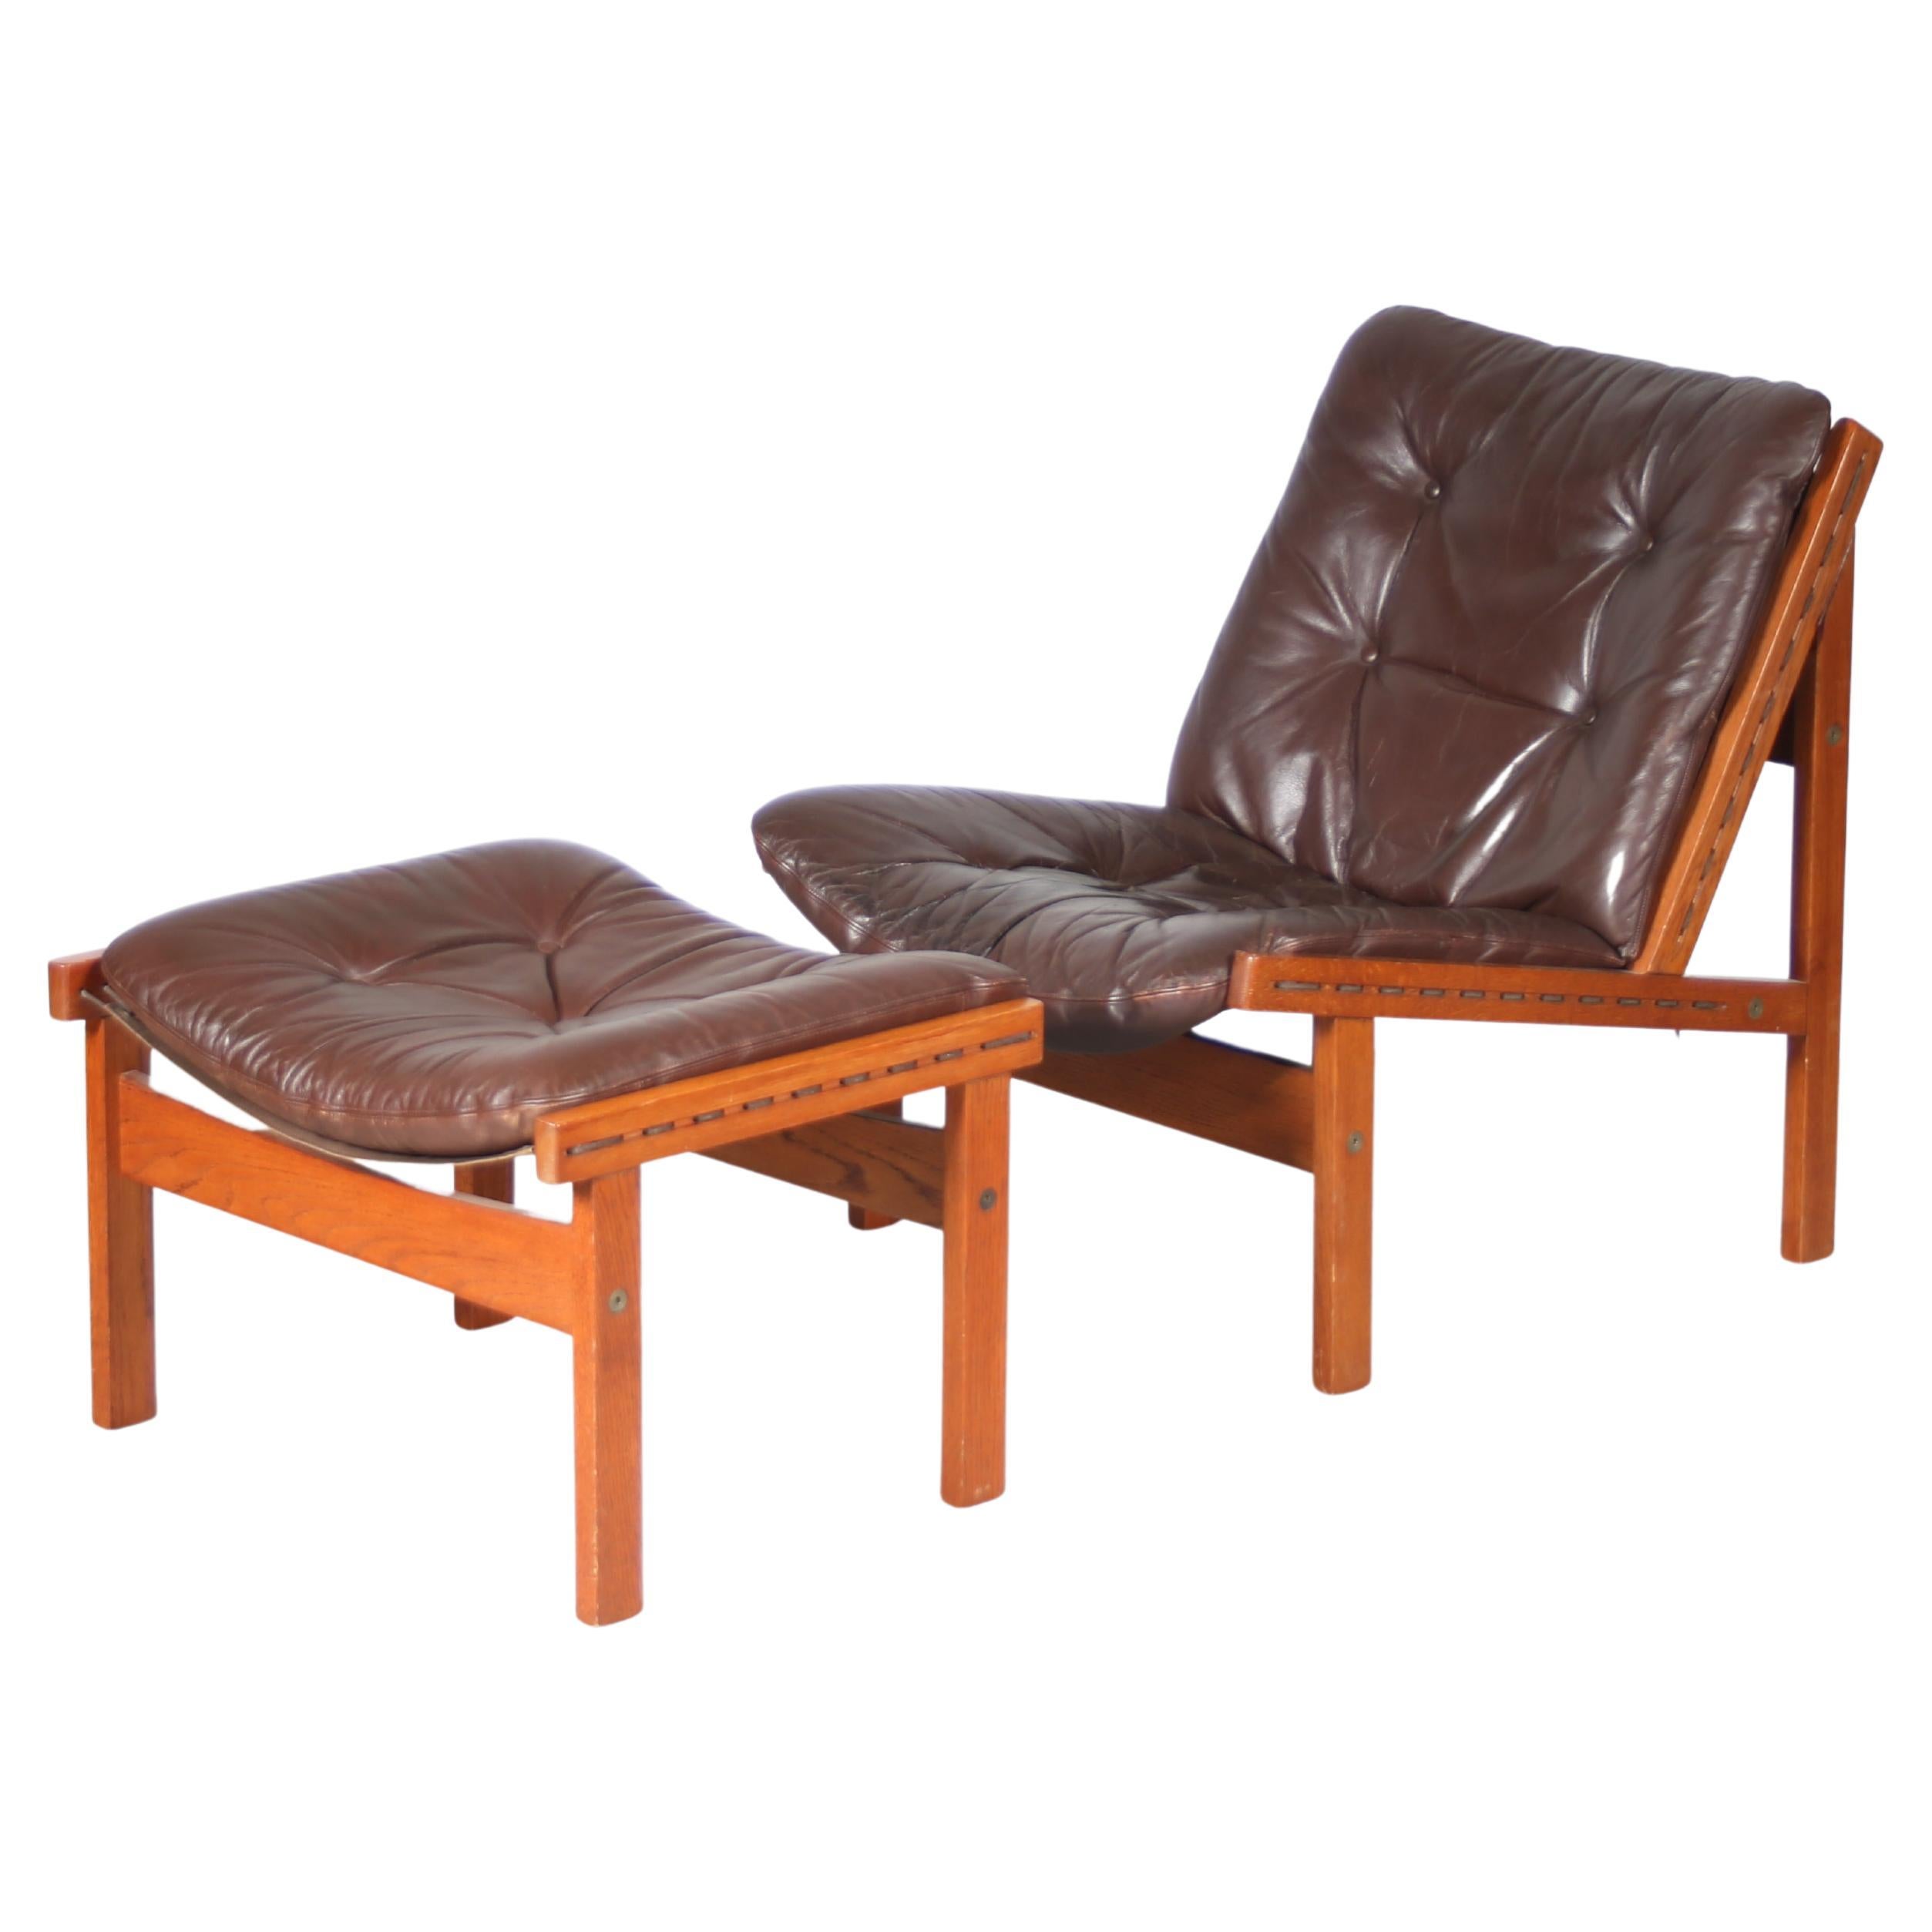 1960s “Hunting chair” + ottoman by Torbjorn Afdal for Bruksbo, Norway For Sale